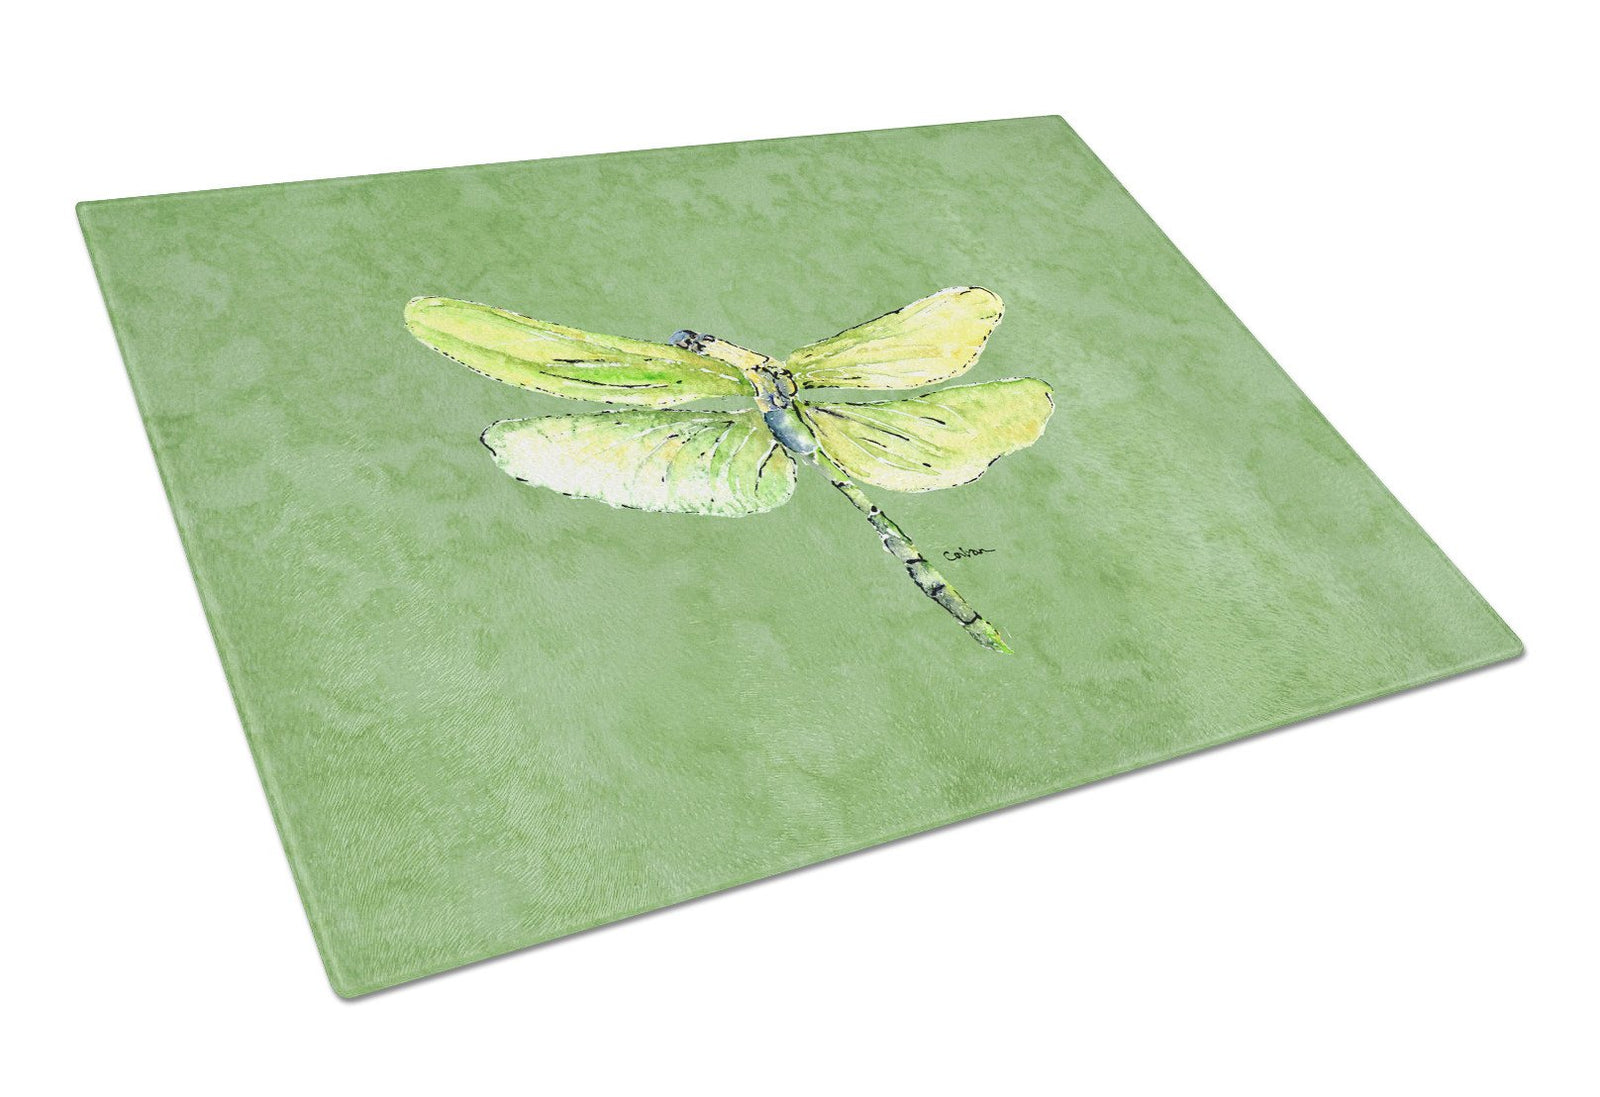 Dragonfly on Avacado Glass Cutting Board Large by Caroline's Treasures